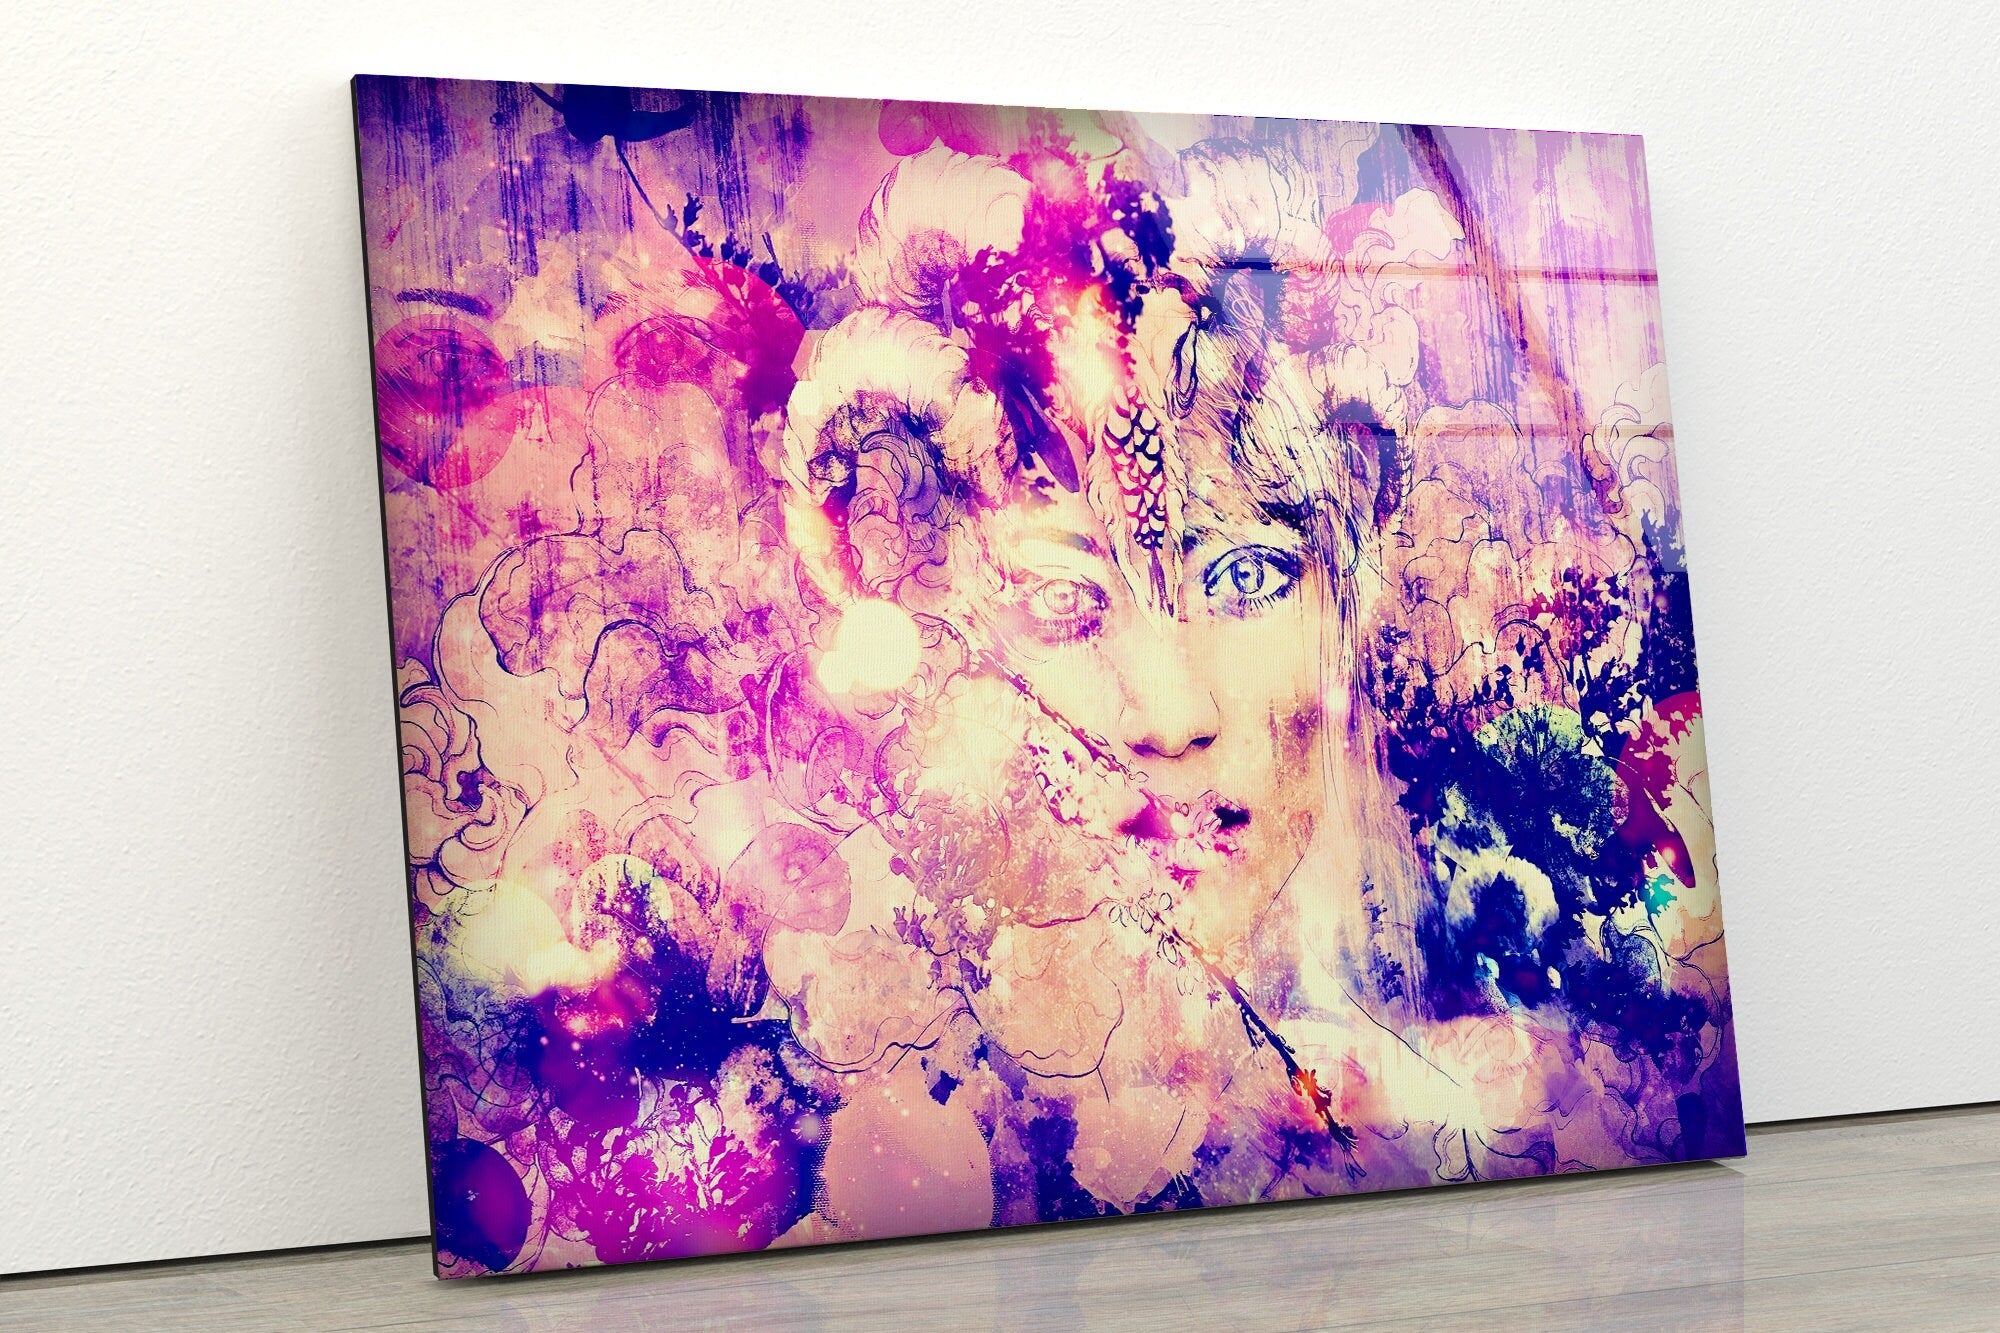 Abstract Woman Painting Tempered Glass Wall Art